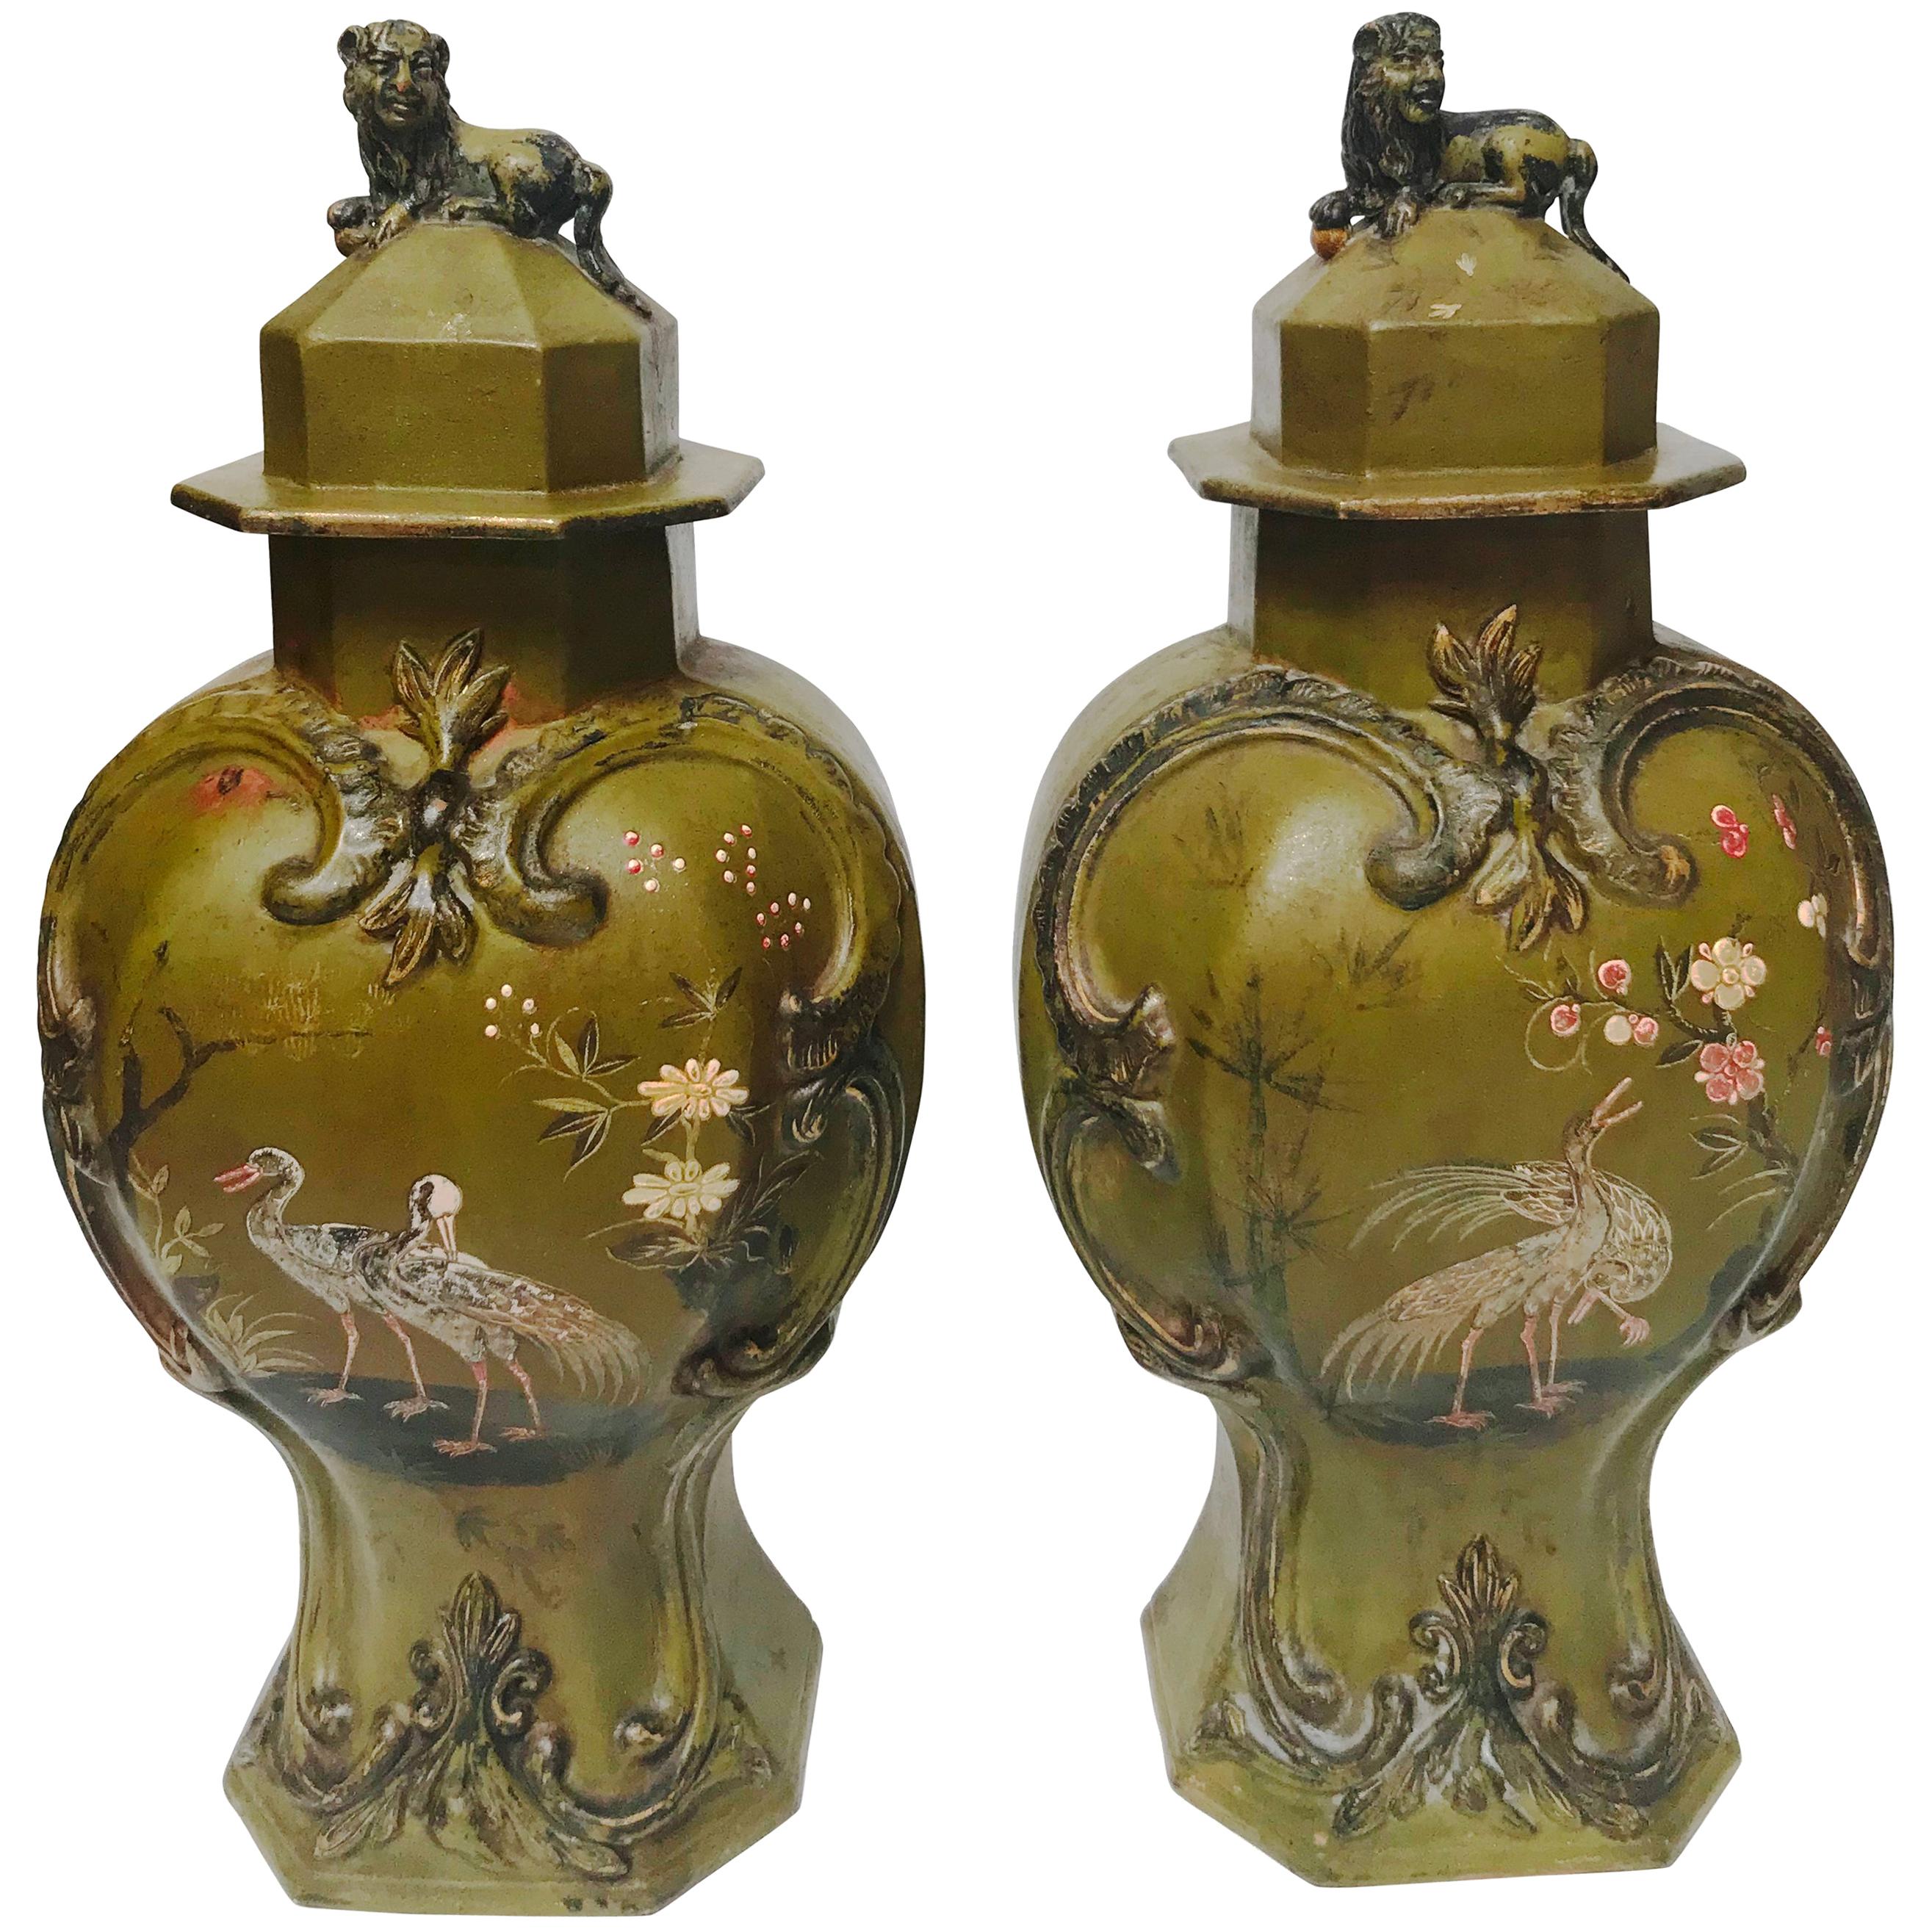 Pair of Rare Biedermeier Lacquered Berlin Faience Garniture Vases and Covers For Sale